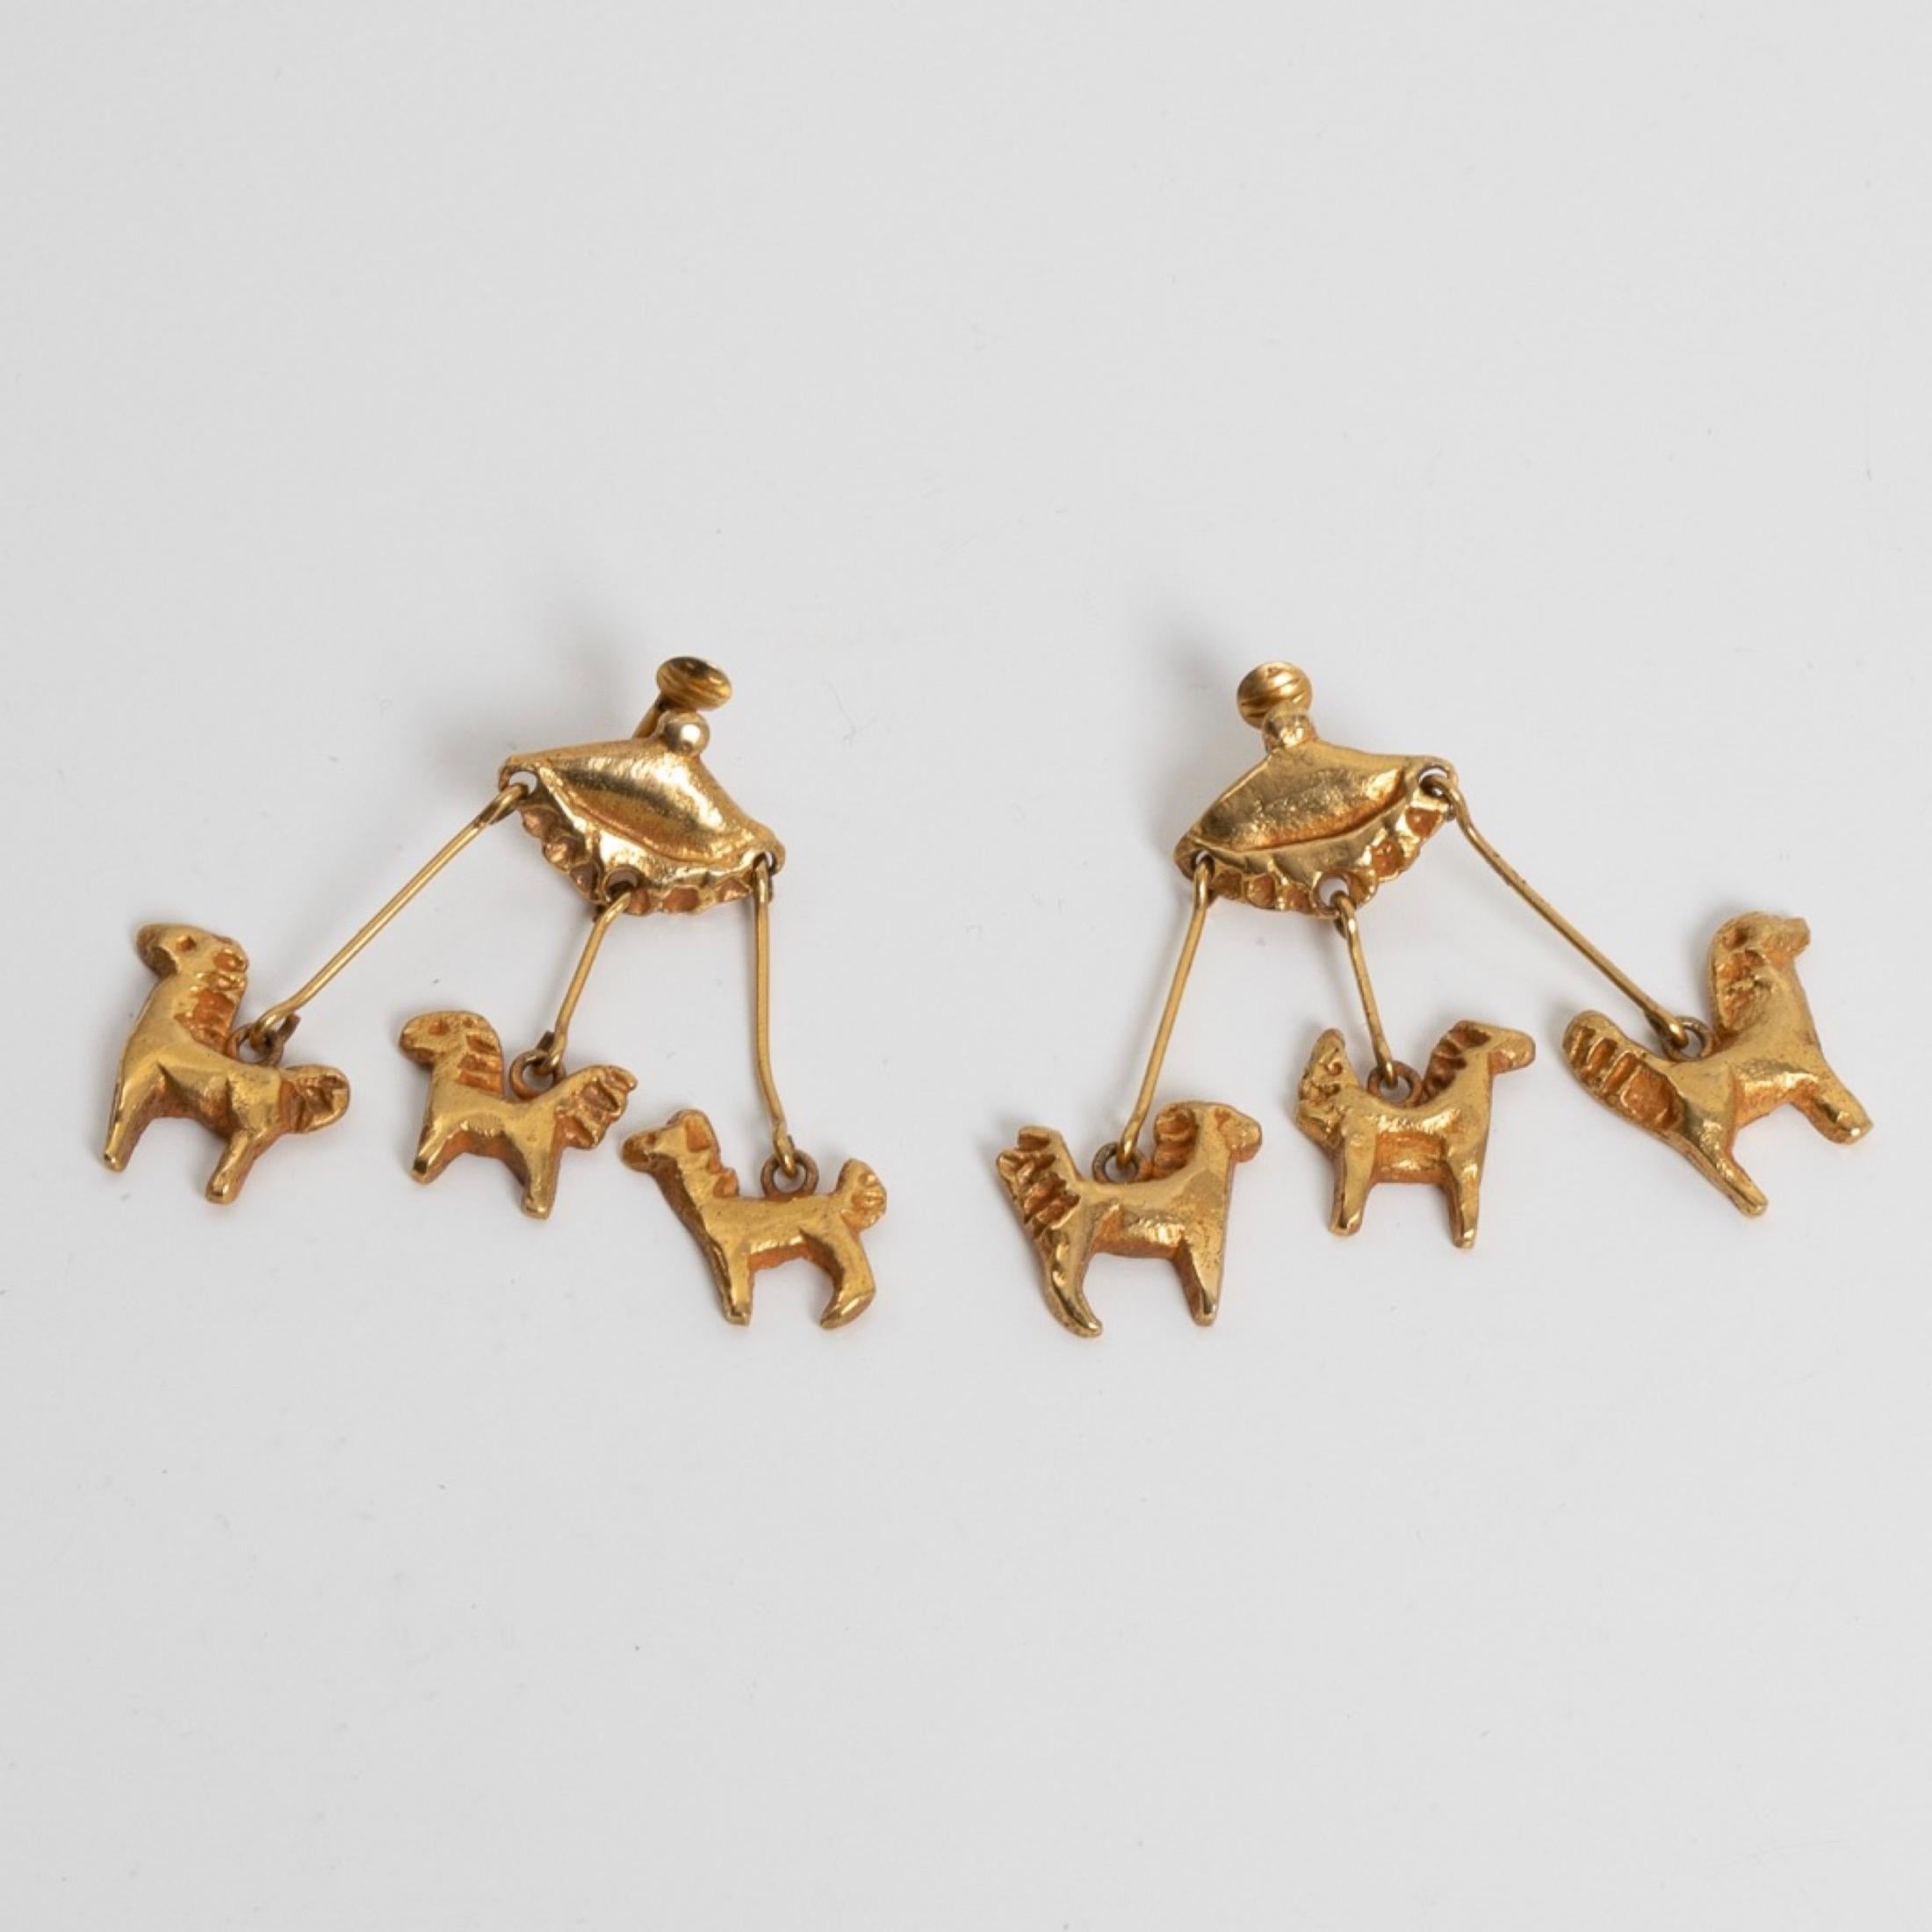 About Le Manège (The merry-go-round) by Line Vautrin
Rare pair of gilt bronze earrings.
Each earring representing a merry-go-round on which three horses are suspended.
Each earring signed LV.